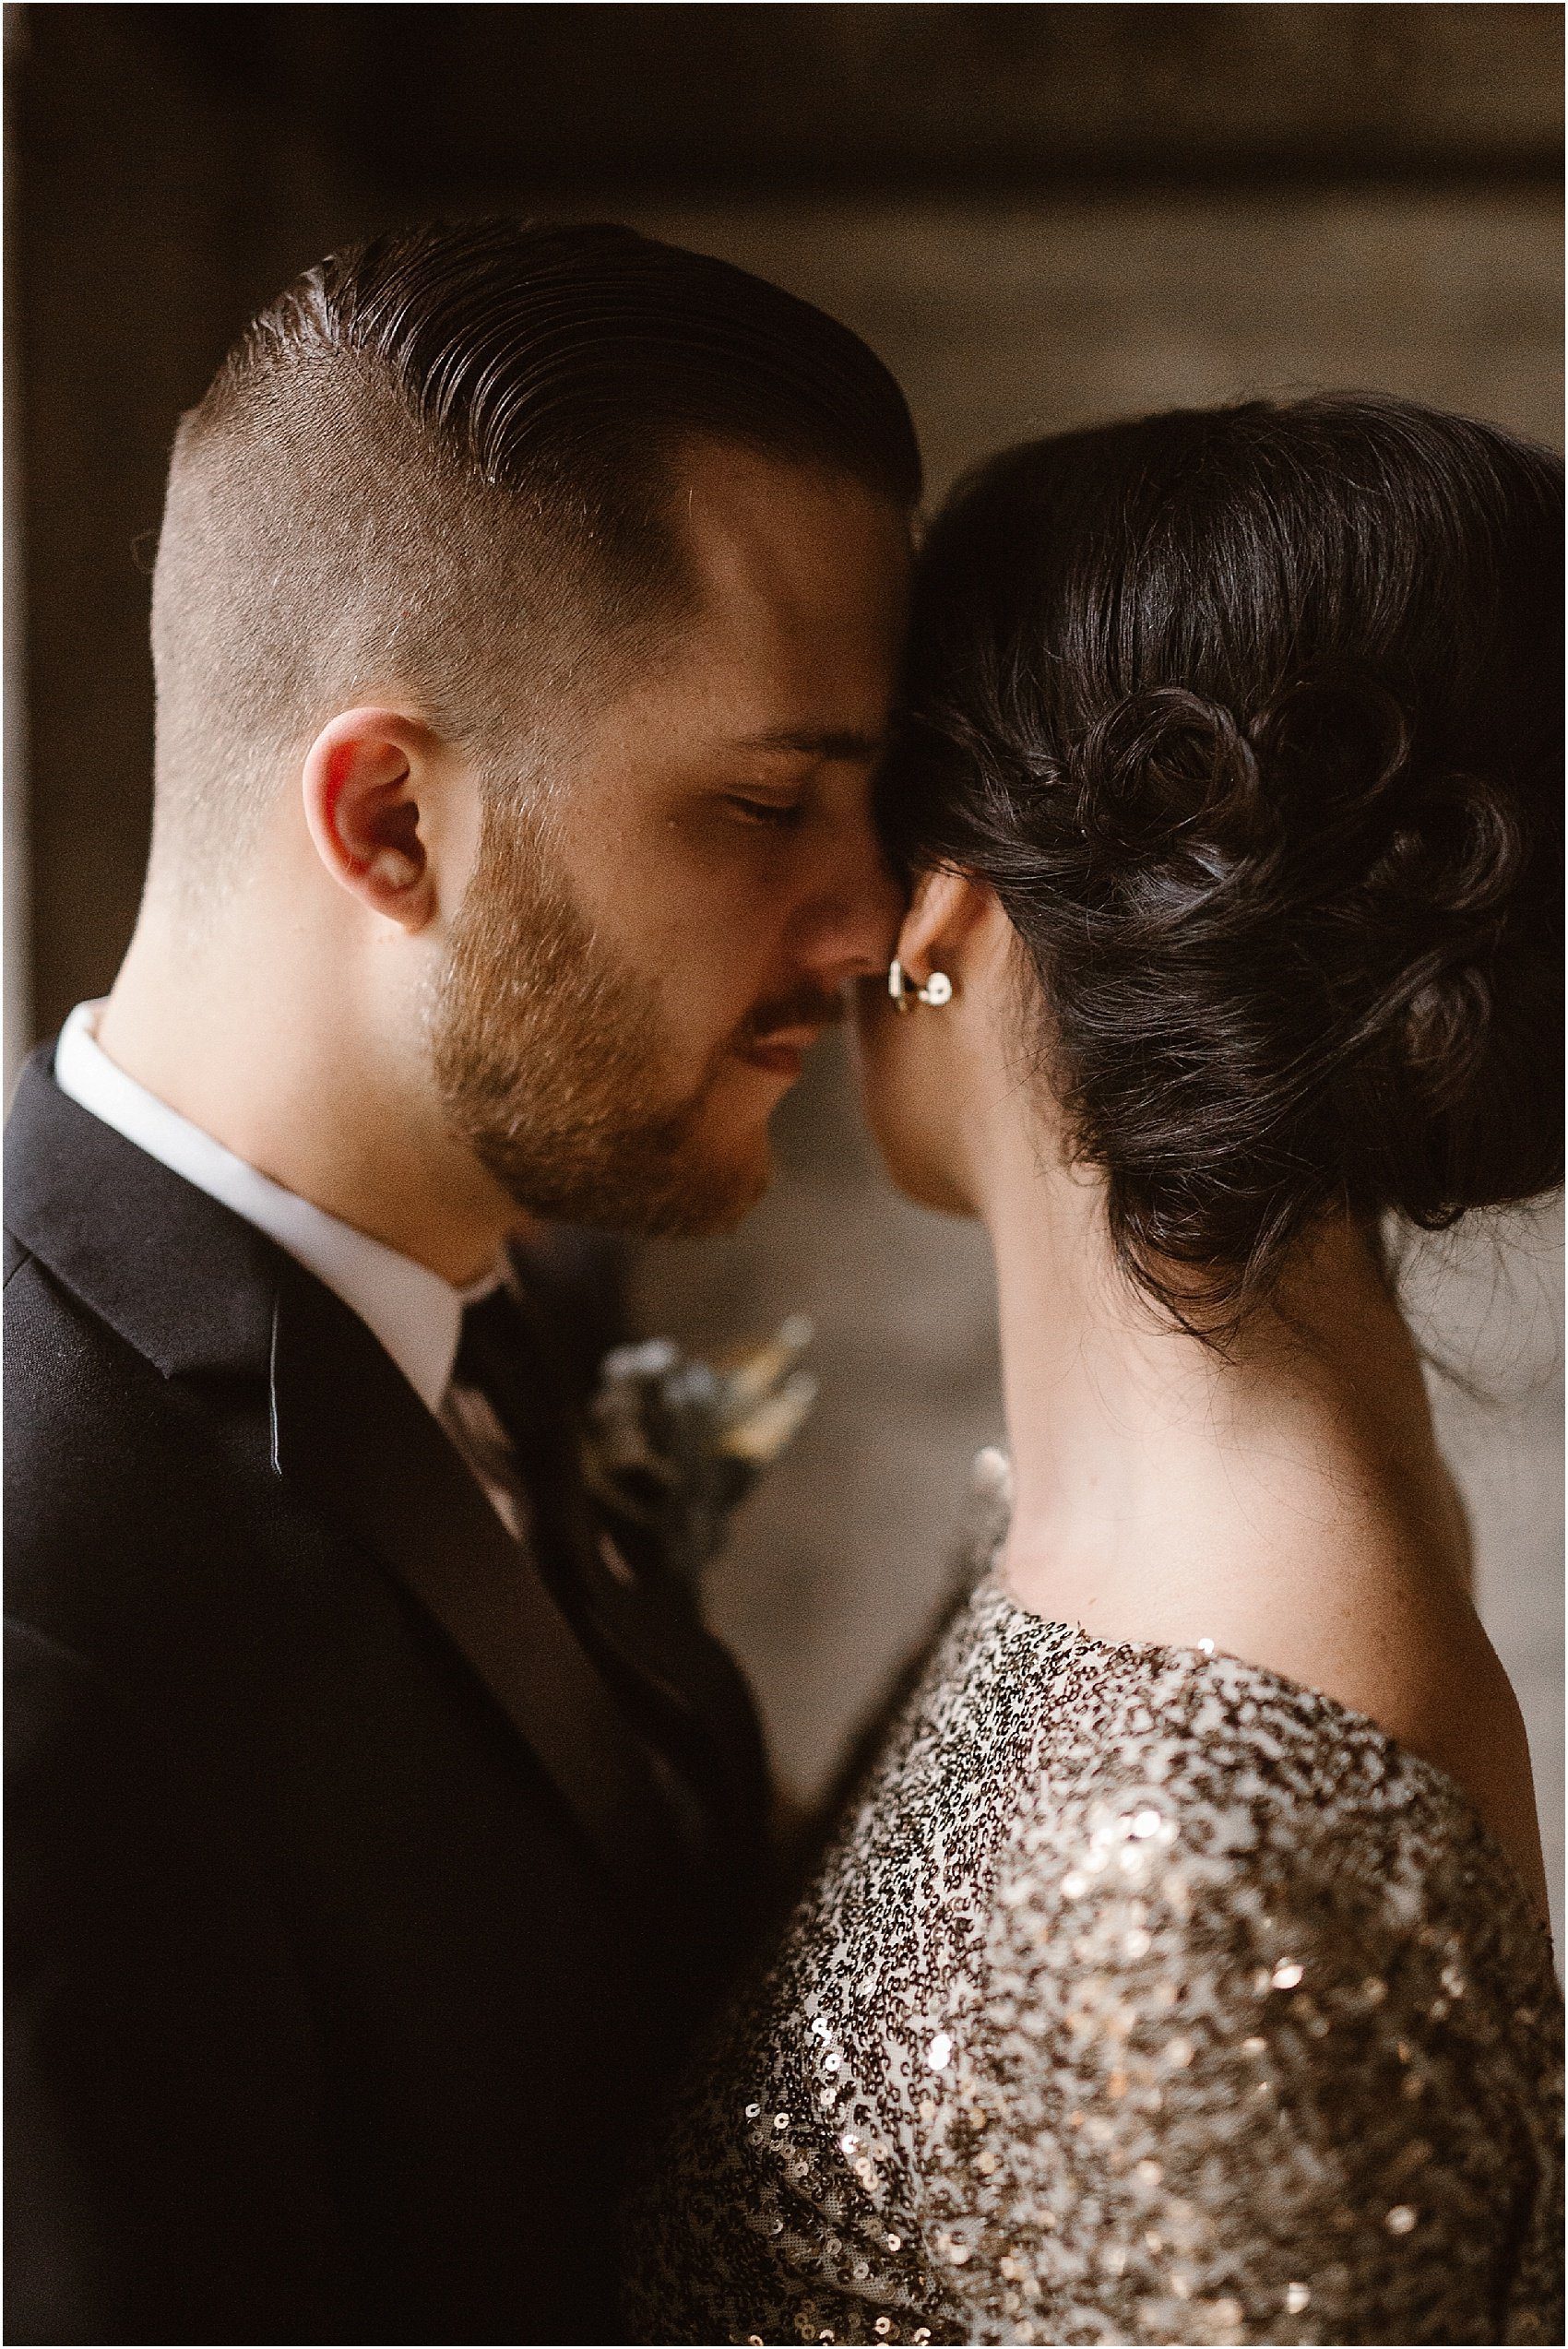 man whispers into ear of woman wearing gold dress 